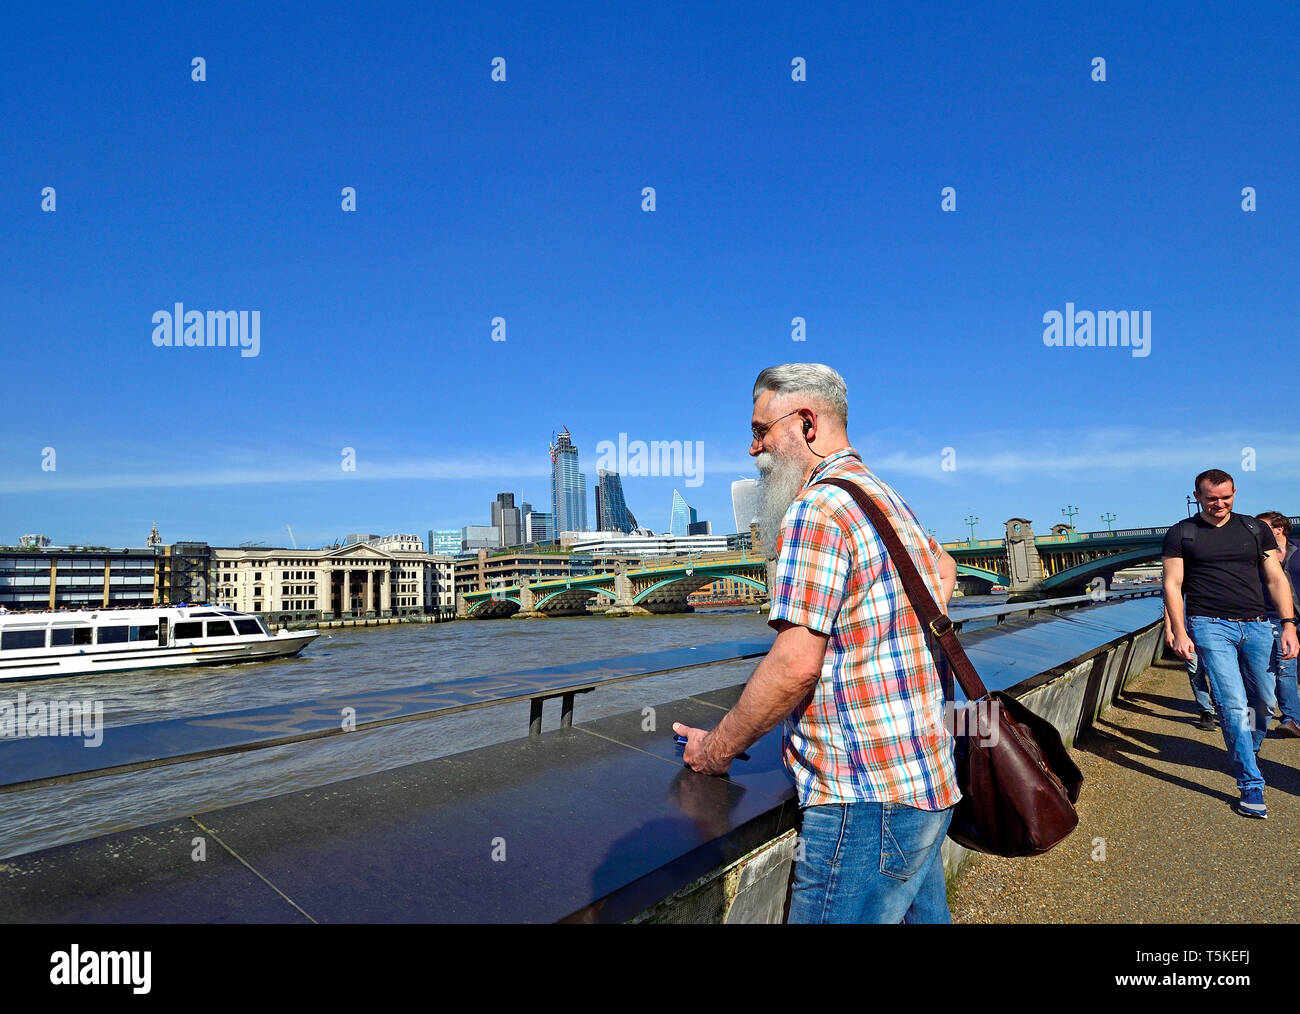 London, England, UK. Bearded man looking out over the River Thames from the South Bank. City of London skyline behind Stock Photo